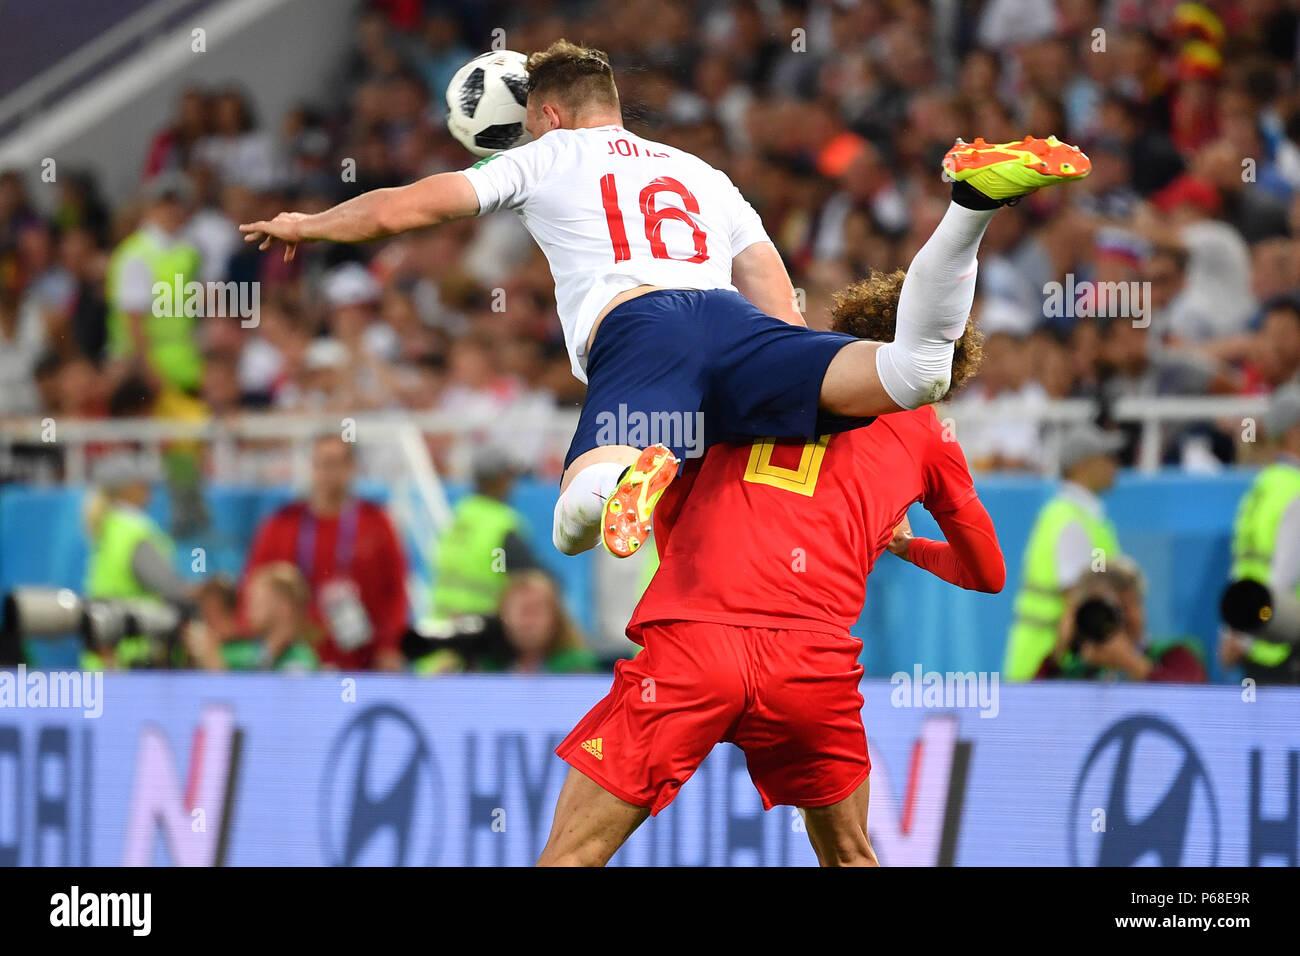 Phil JONES (ENG) is about Marouane FELLAINI (BEL), action, duels. England (ENG) - Belgium (BEL 0-1, preliminary round, Group G, match 45, on 28/06/2018 in Kaliningrad, Arena Kaliningrad Football World Cup 2018 in Russia from 14/06 to 15/07/2018. | Usage worldwide Stock Photo